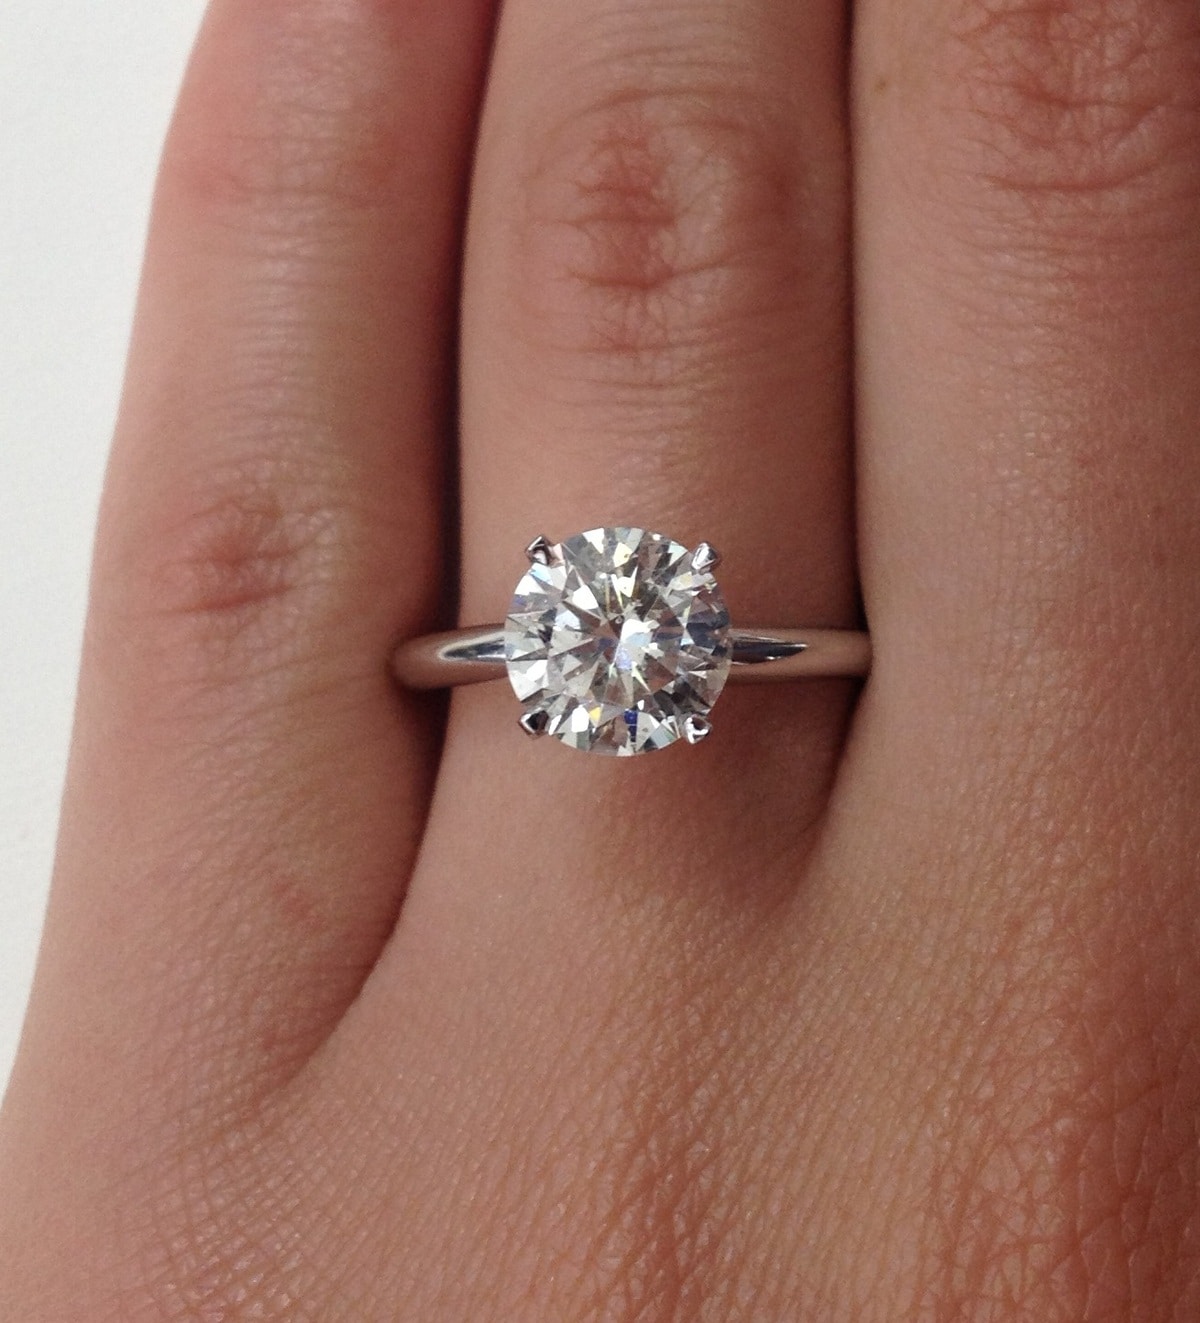 Pictures of 2 carat engagement rings